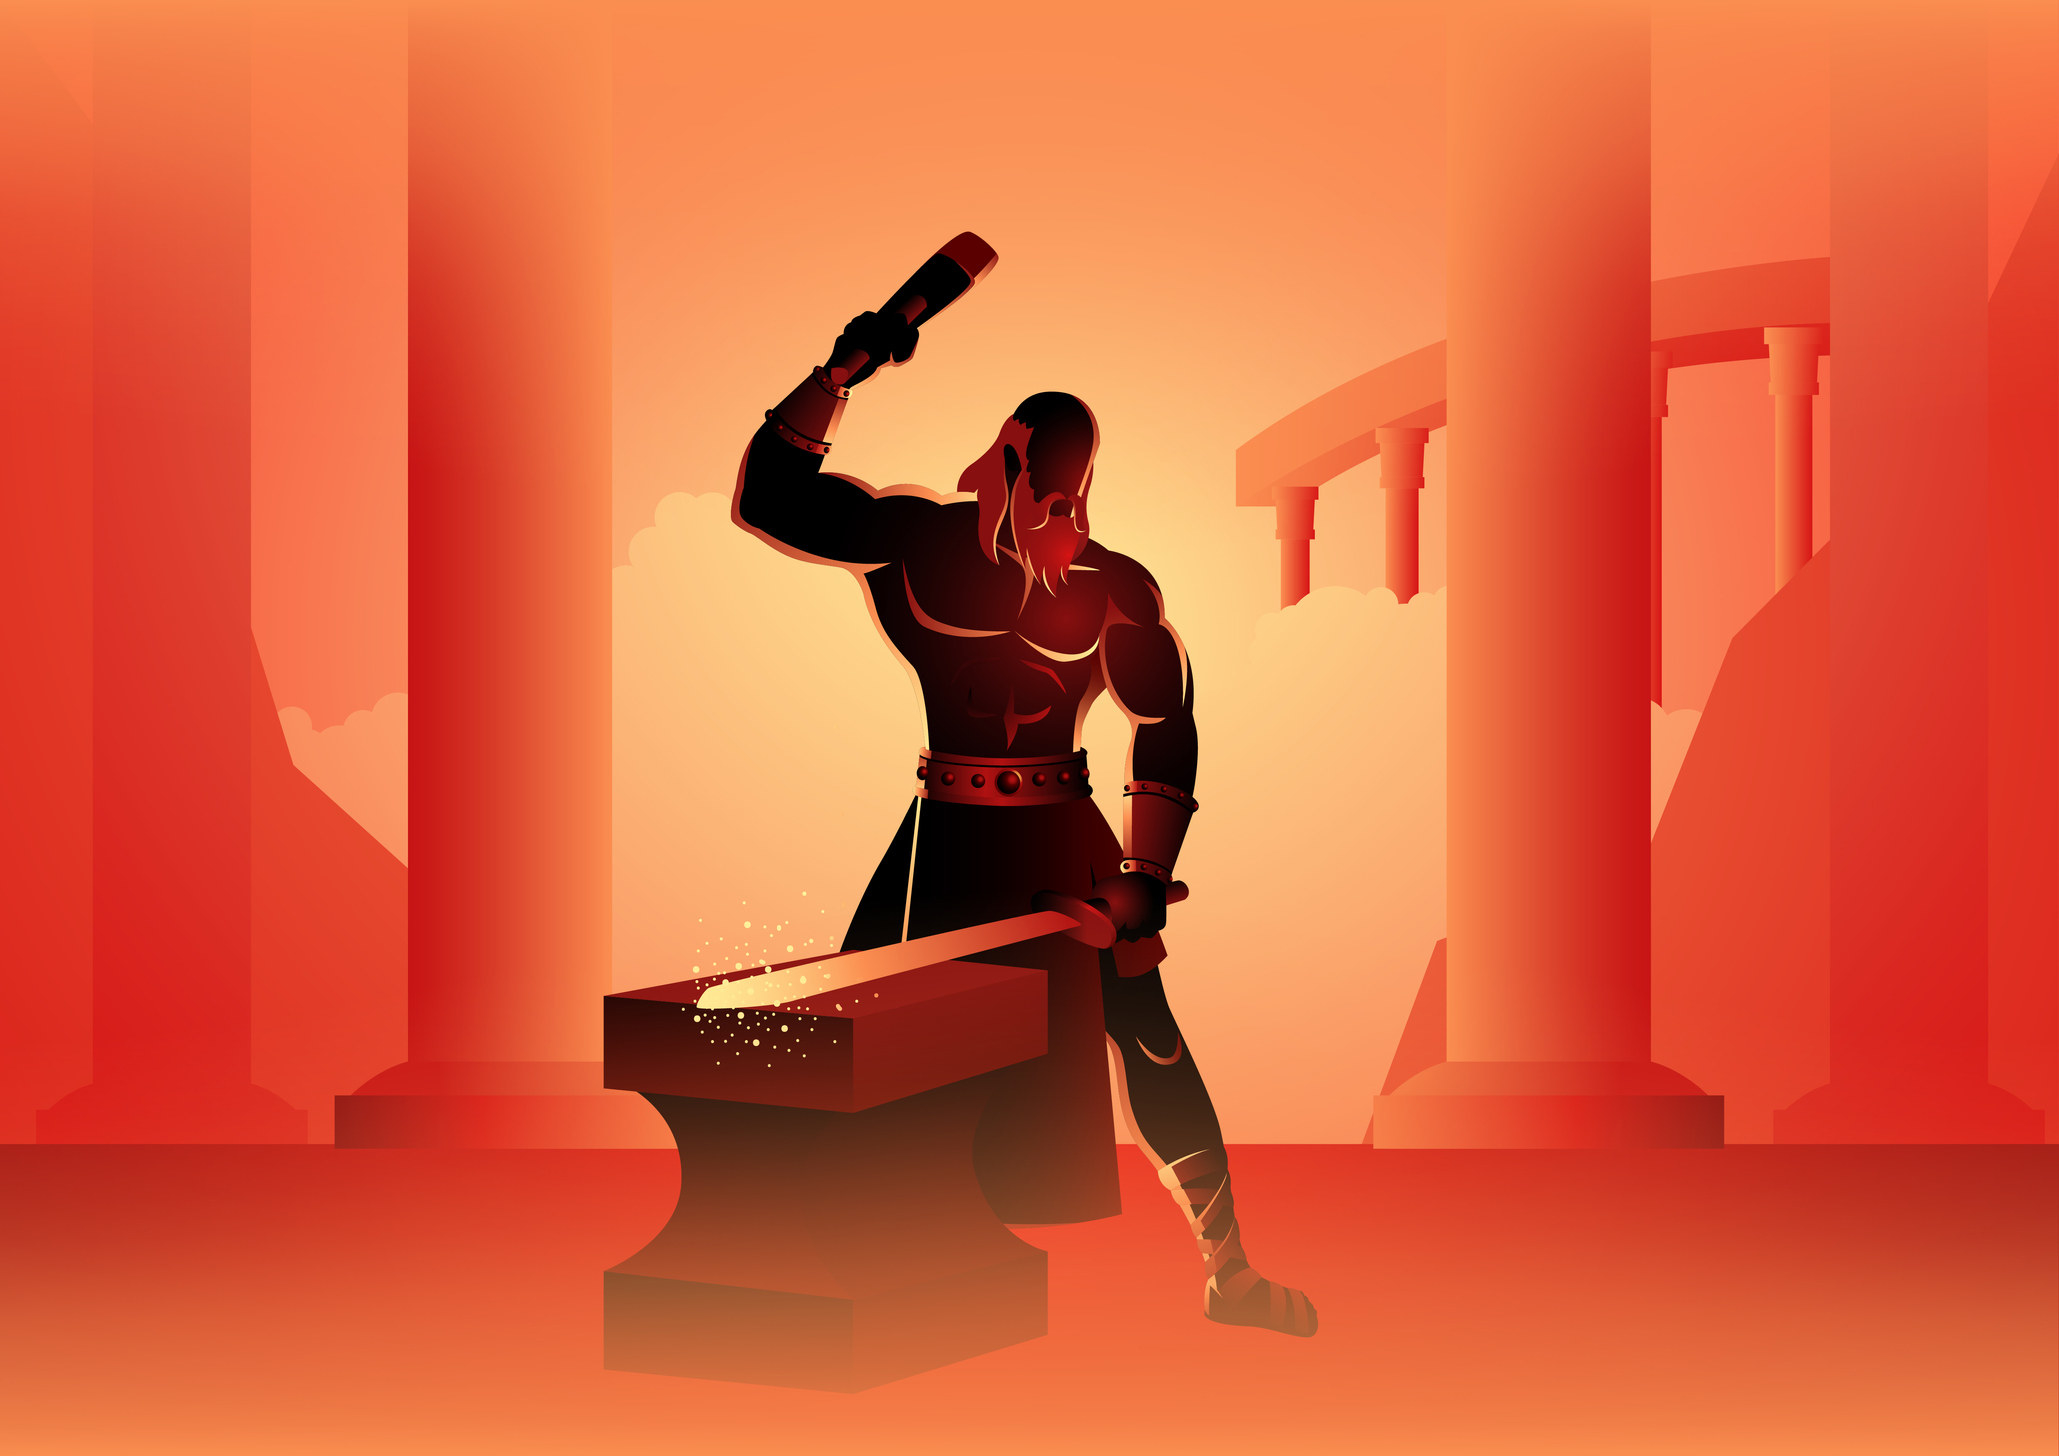 An orange and red tinted image of Hephaestus about to bring a hammer down on a sword